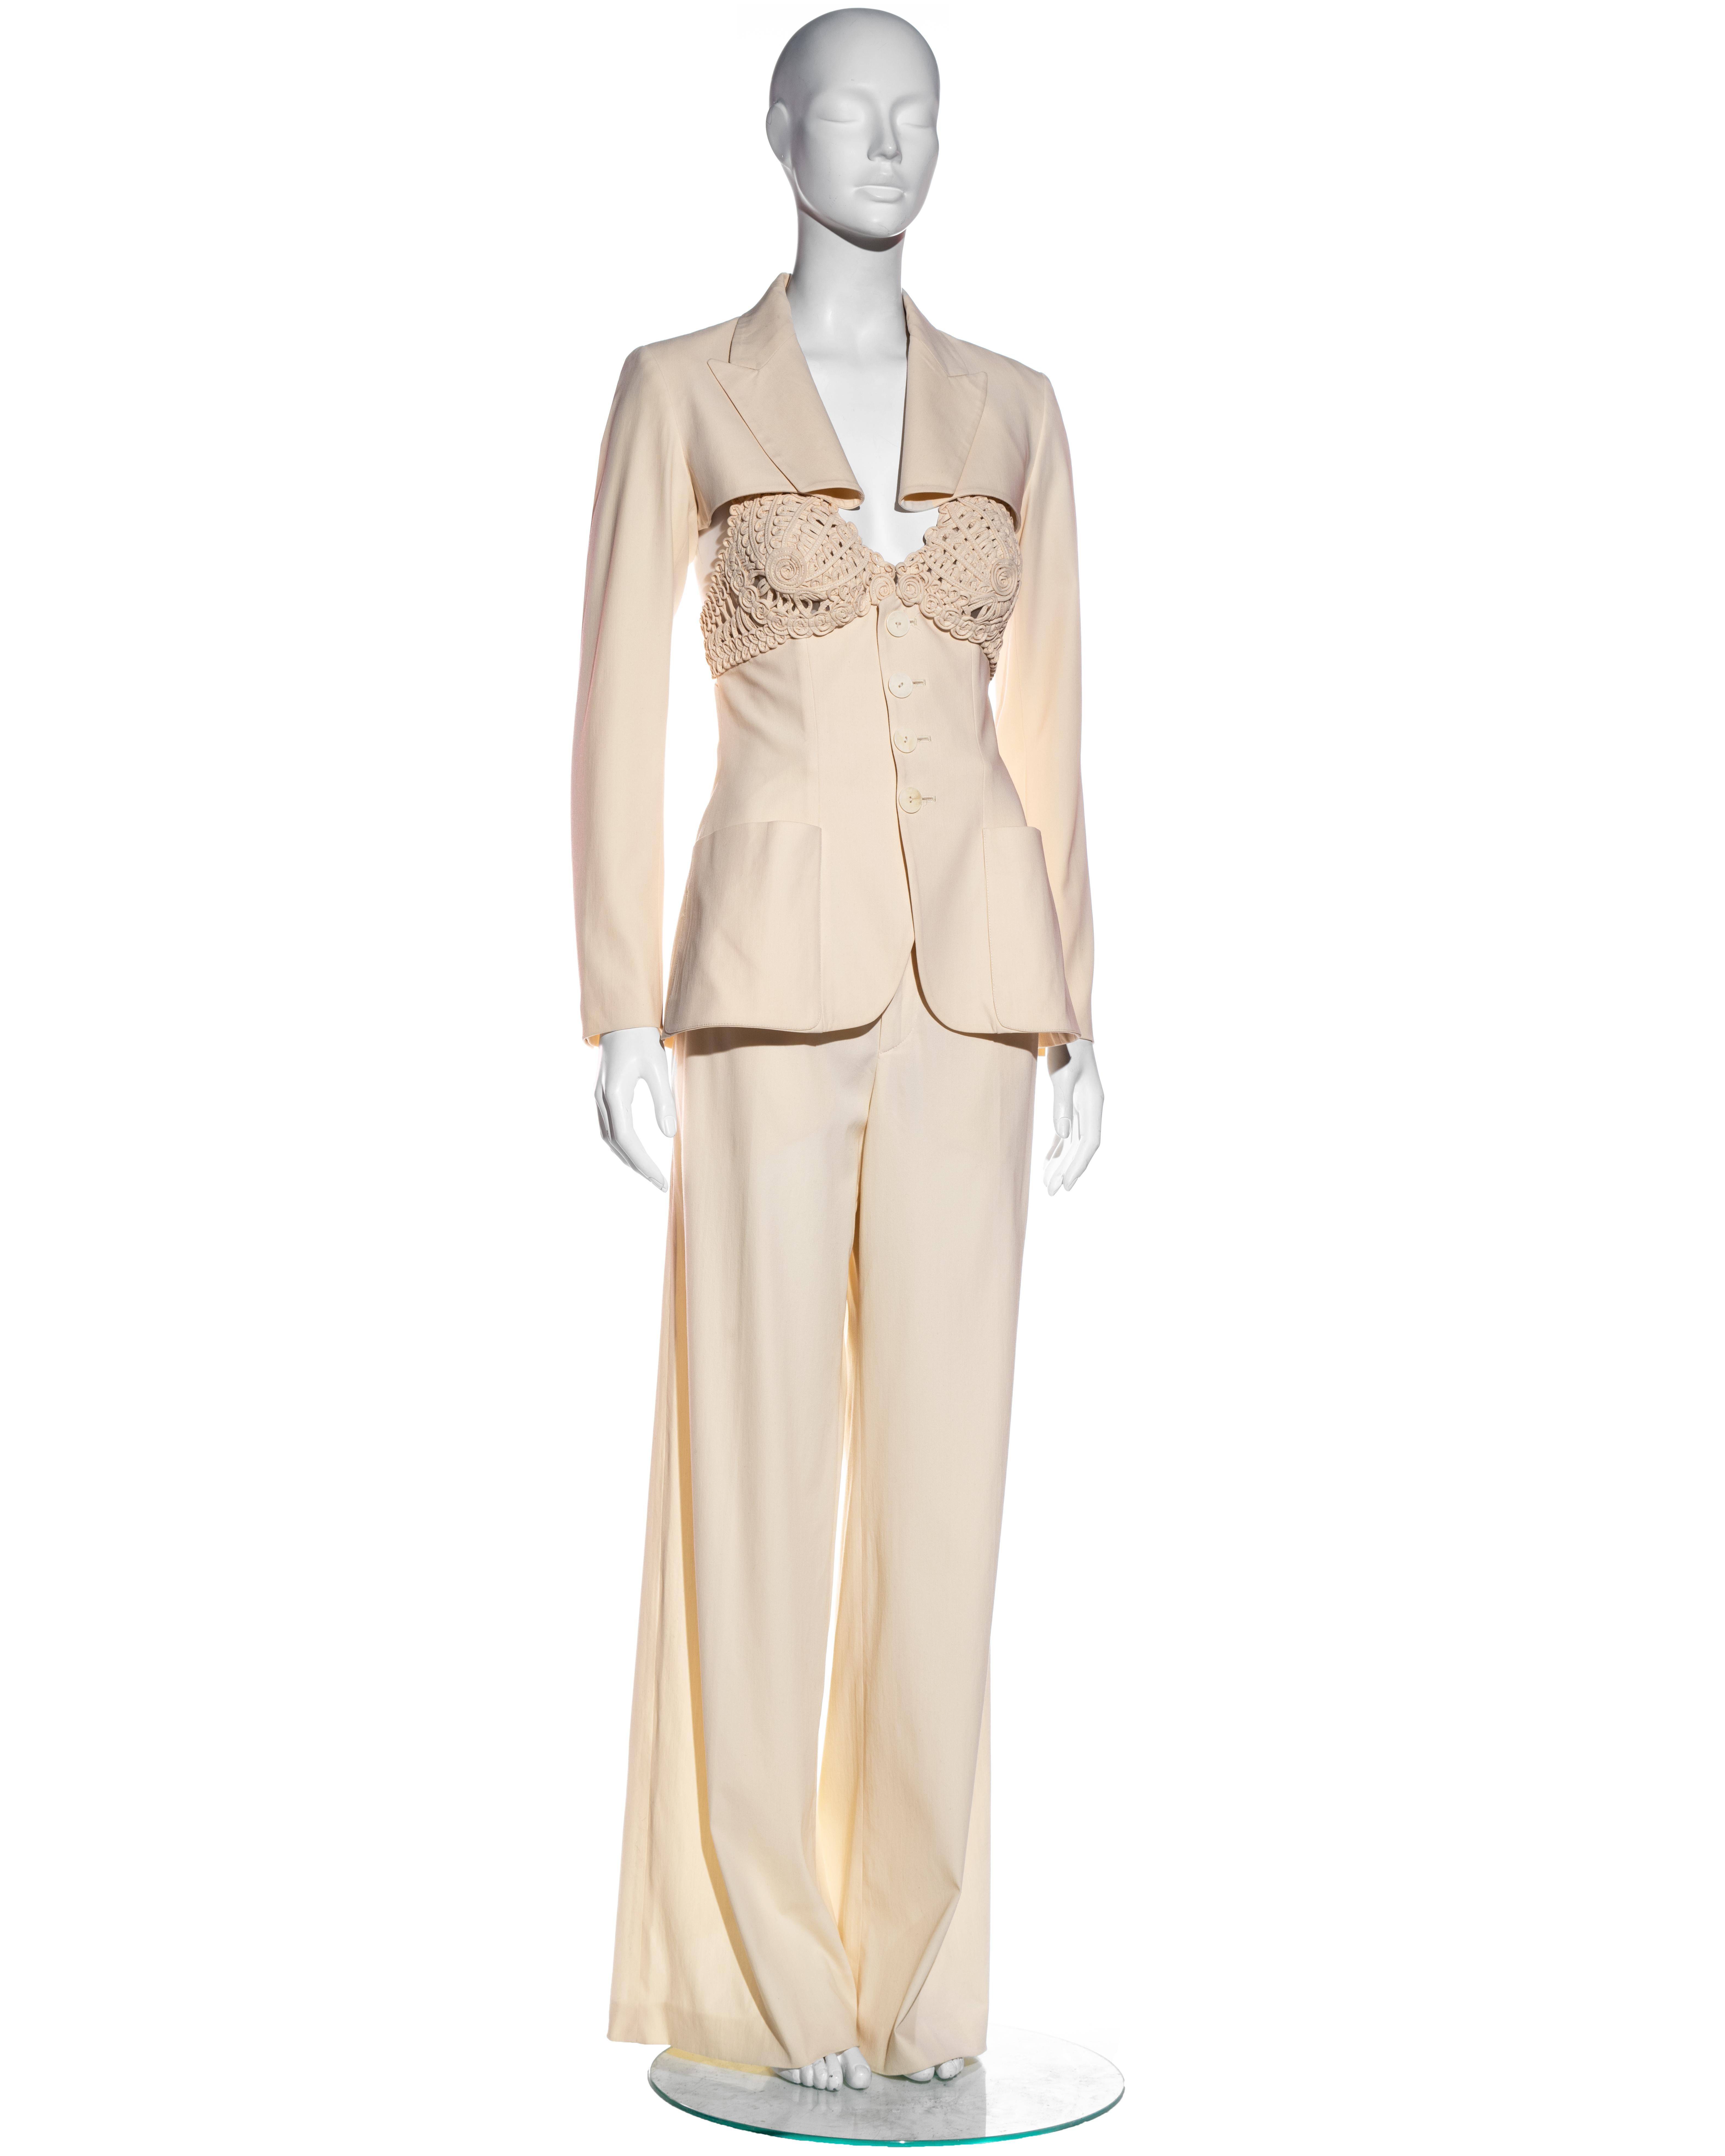 ▪ Jean Paul Gaultier cream wool blend 3-piece pant suit
▪ Macramé bra top with suit-style boned bodice 
▪ Spencer jacket with extended lapel
▪ Wide-leg trousers 
▪ IT 44 - FR 40 - UK 12 
▪ Spring-Summer 2007